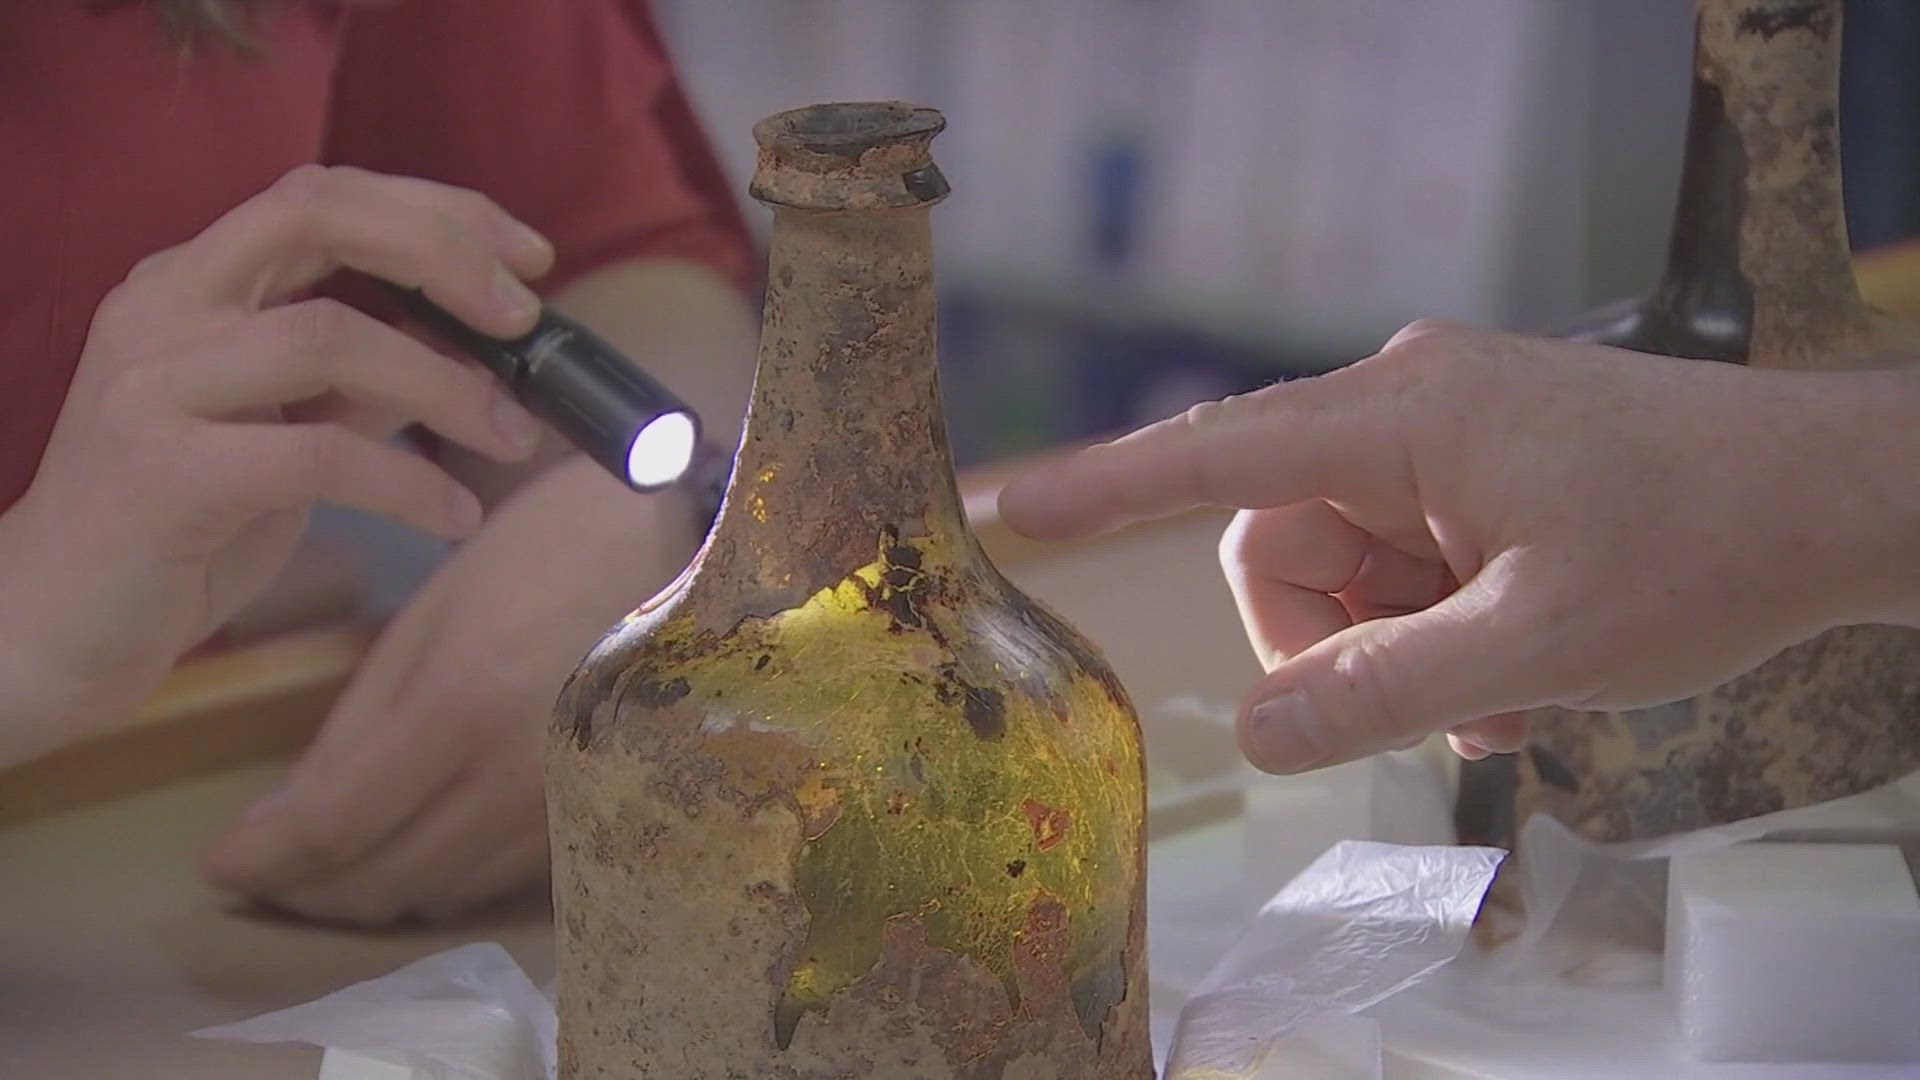 Experts say the artifacts haven't been seen in about 250 years and may have been used by George Washington himself.